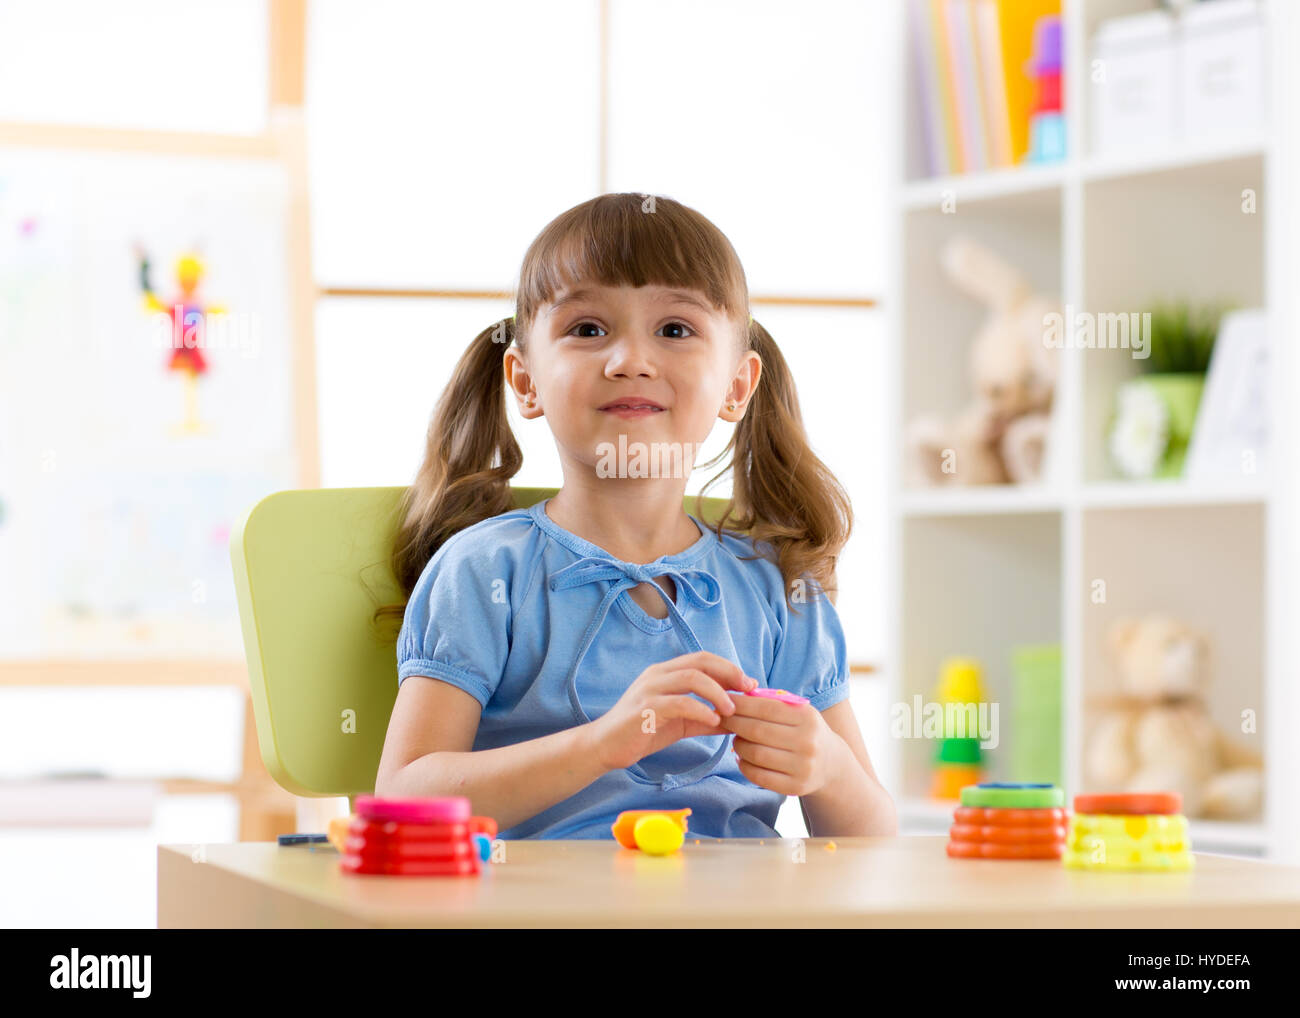 Kid girl playing with plasticine at home Stock Photo